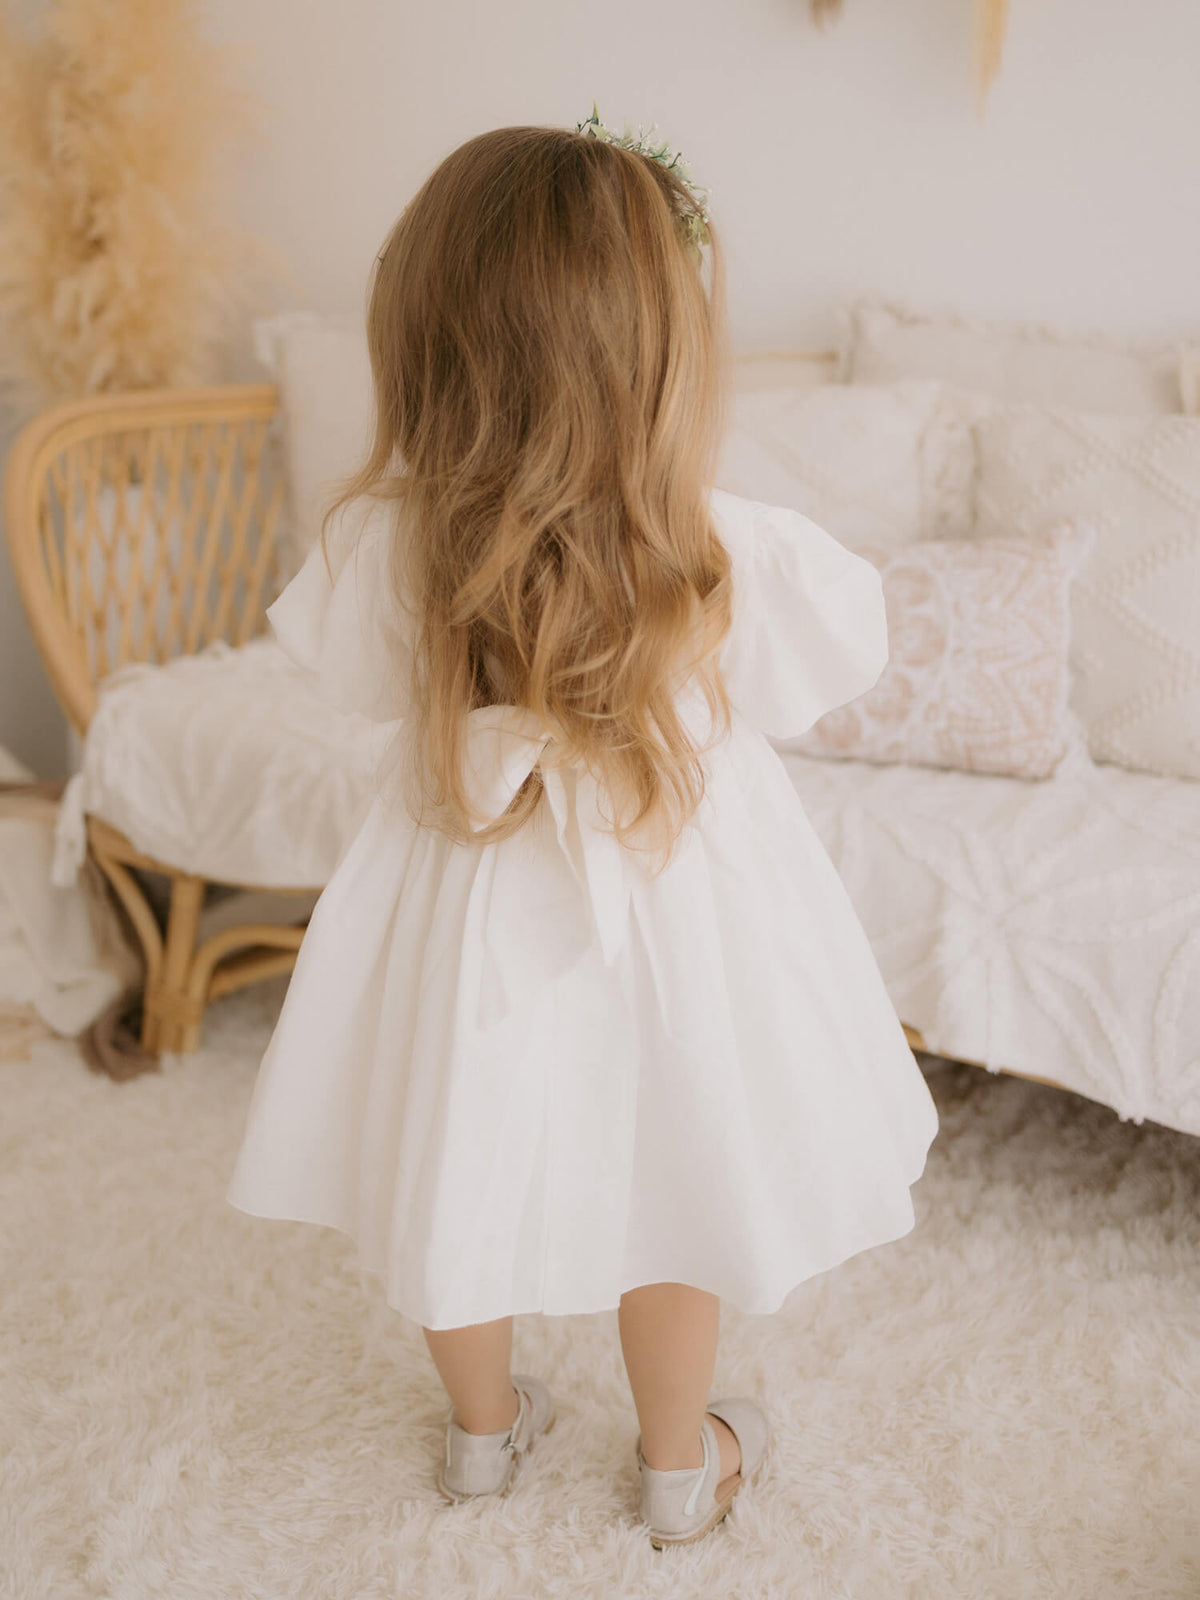 Cleo flower girl dress in linen, clearance style.